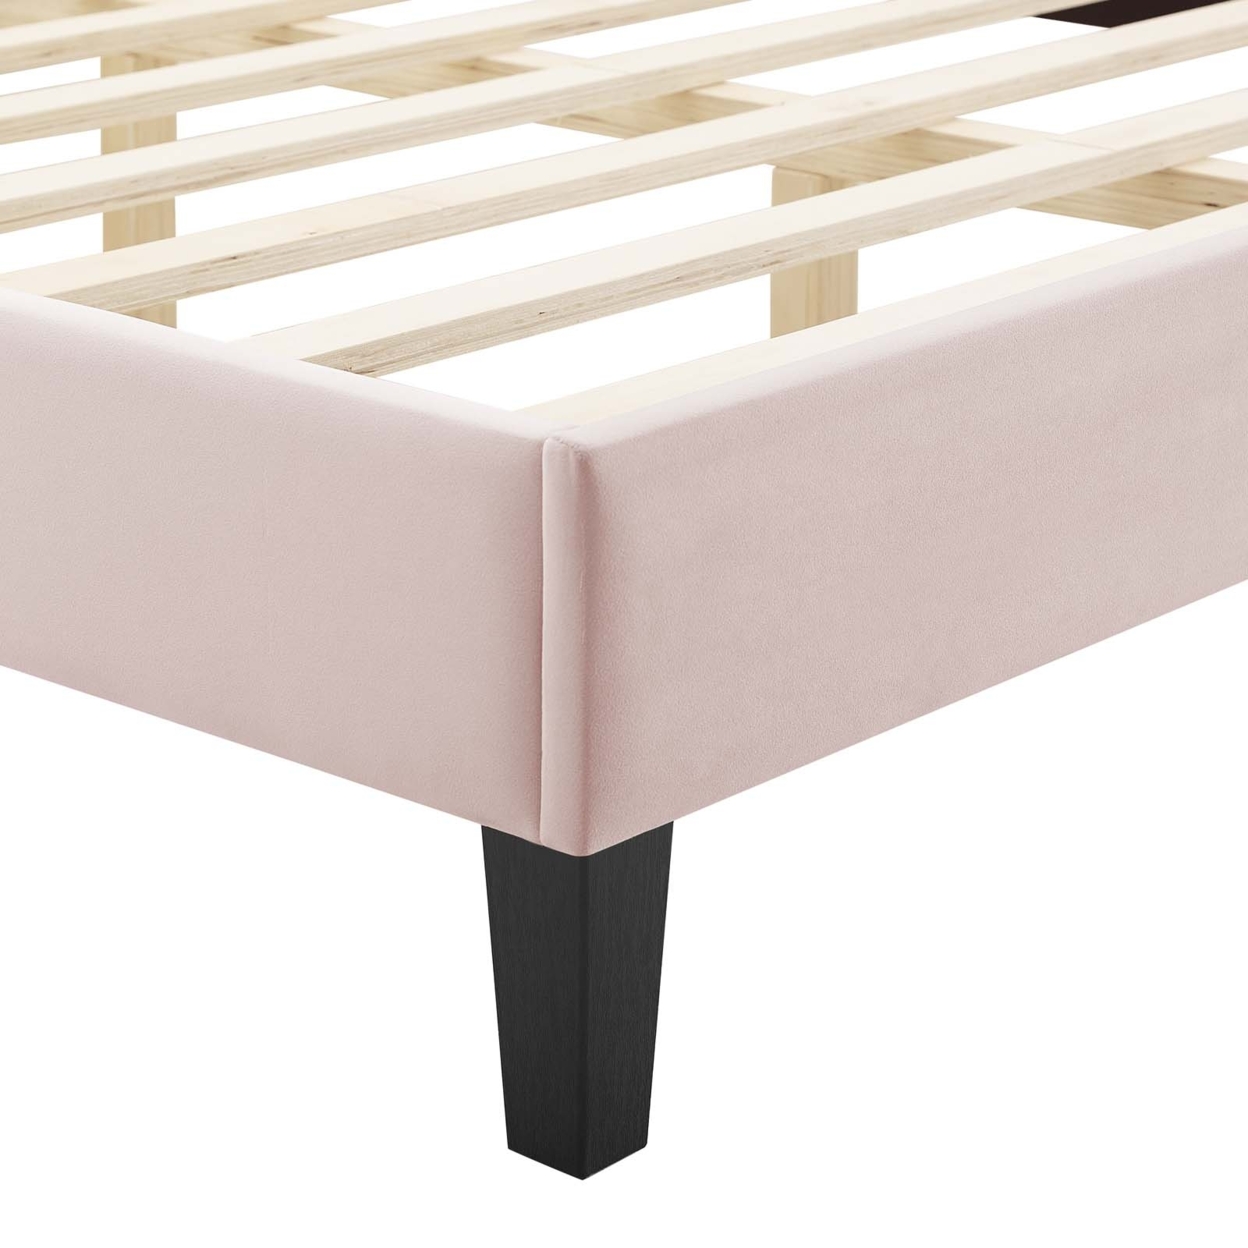 Fabric Upholstered Full Size Tufted Bed With Tapered Wood Legs, Light Pink